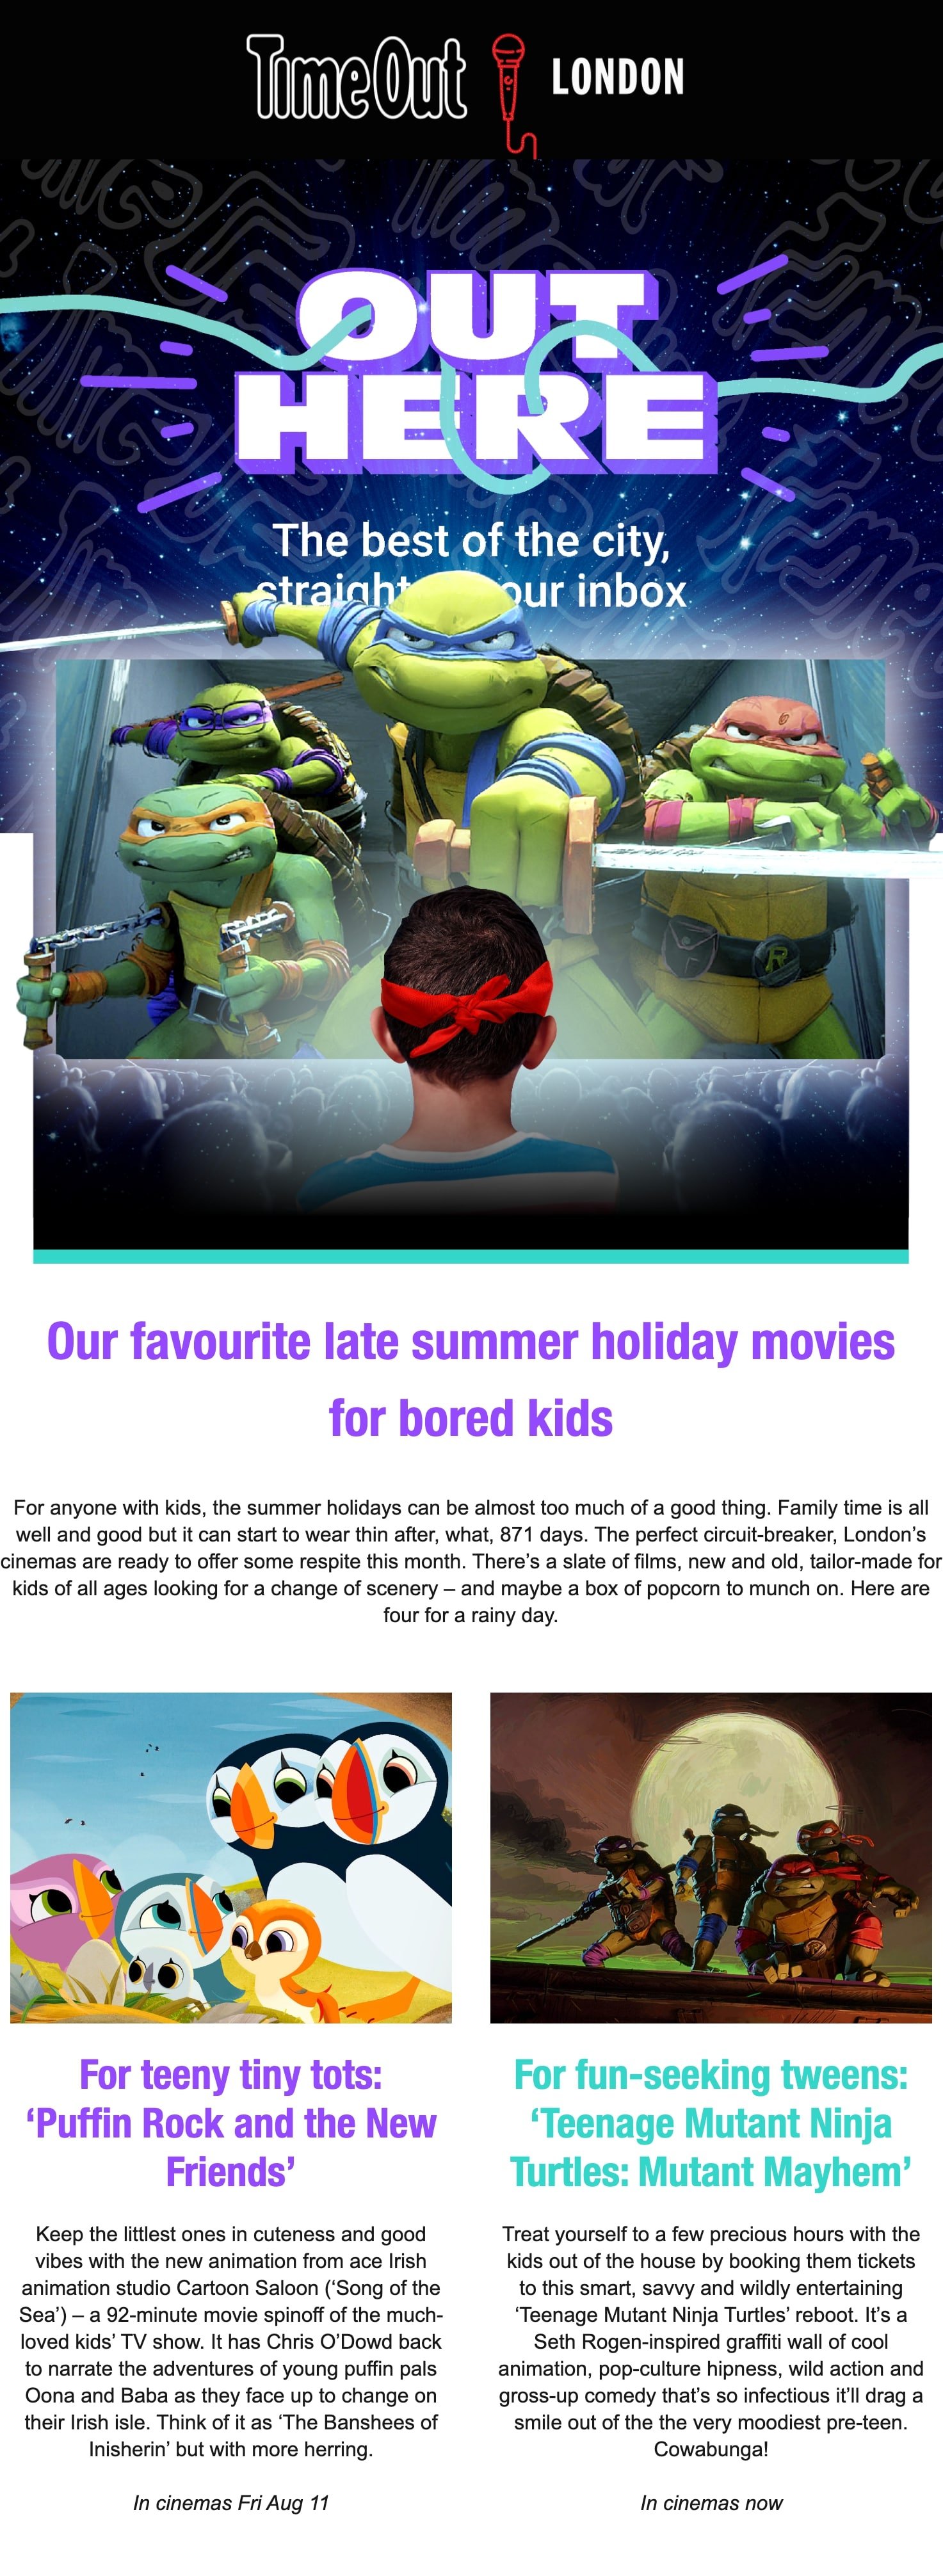 A family activity ideas from TimeOut London showing kids friendly cinema screening